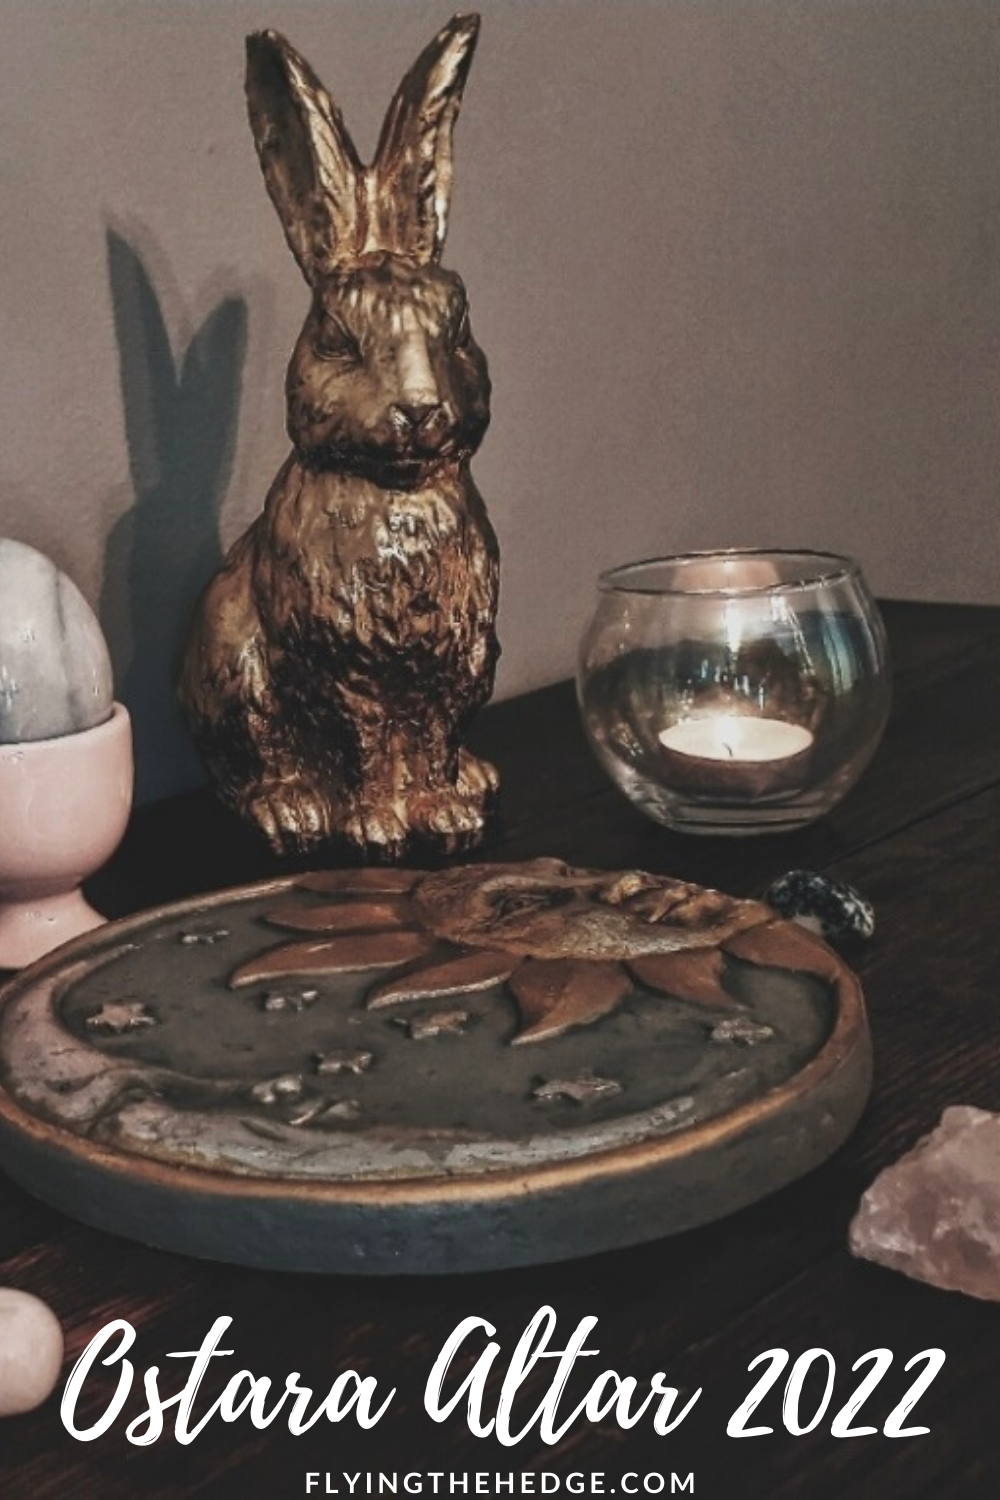 Ostara, Spring Equinox, altar, witchcraft, hedgewitch, hedge witch, sabbat, Candlemas, witch, wicca, wiccan, pagan, neopagan, occult